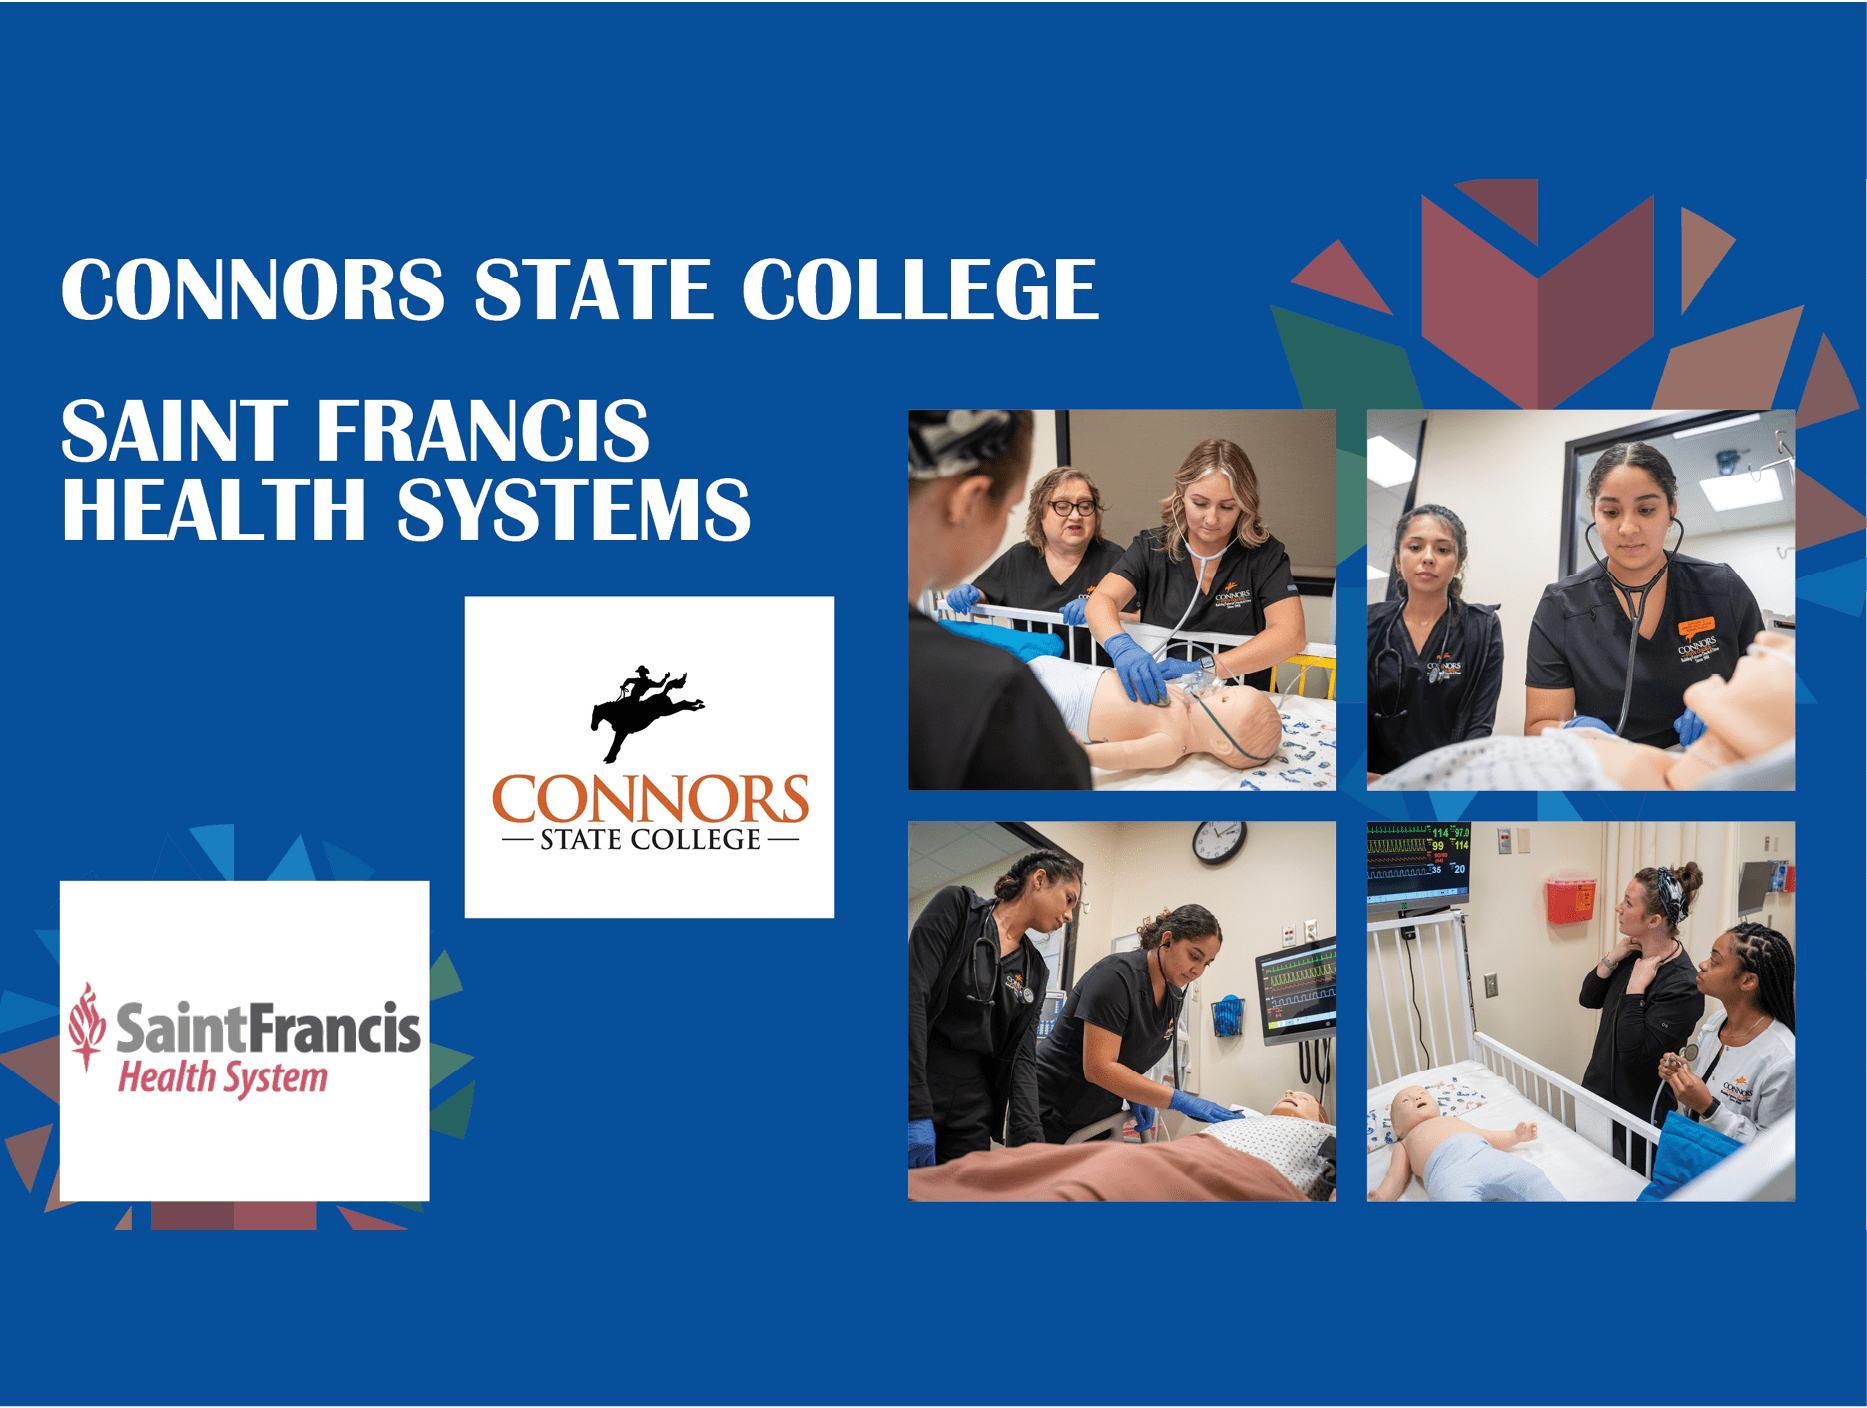 Connors State College and Saint Francis Health Systems